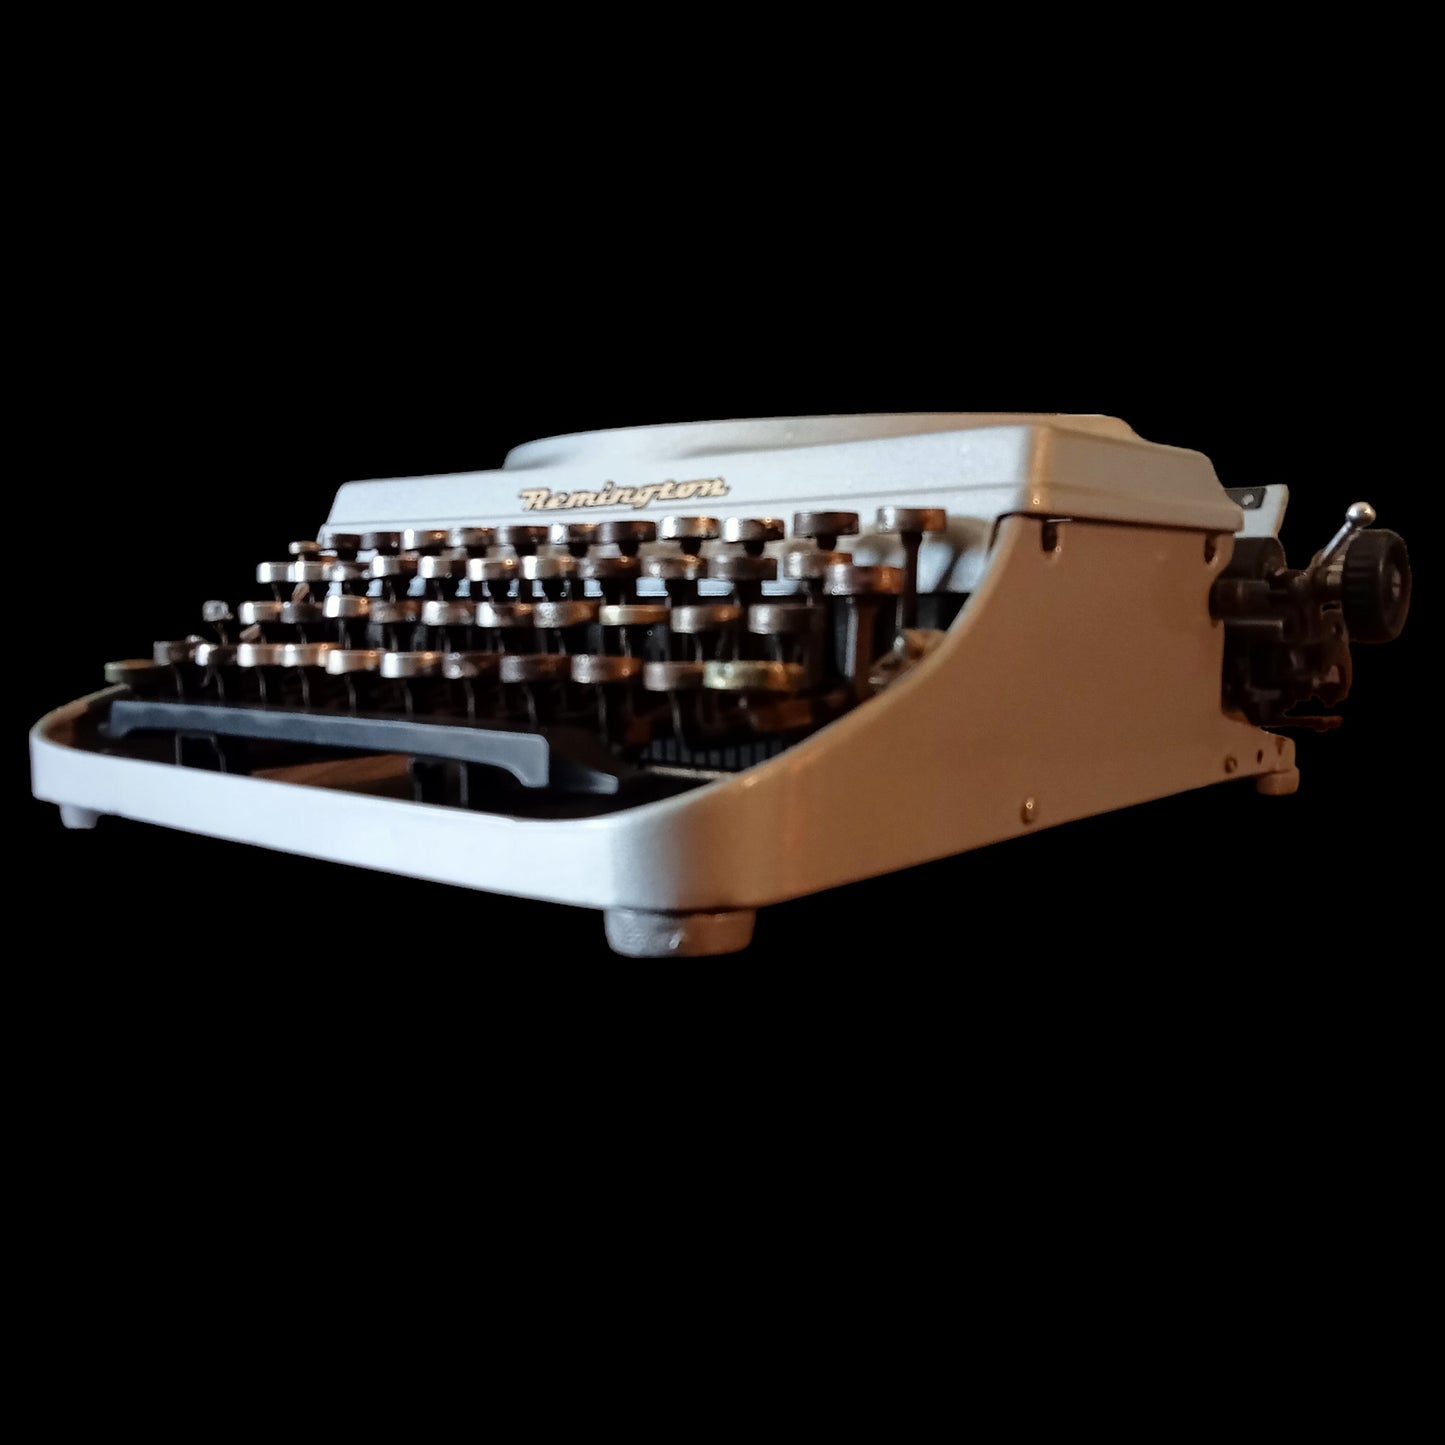 Image of Remington Vintage Typewriter. Available from universaltypewritercompany.in